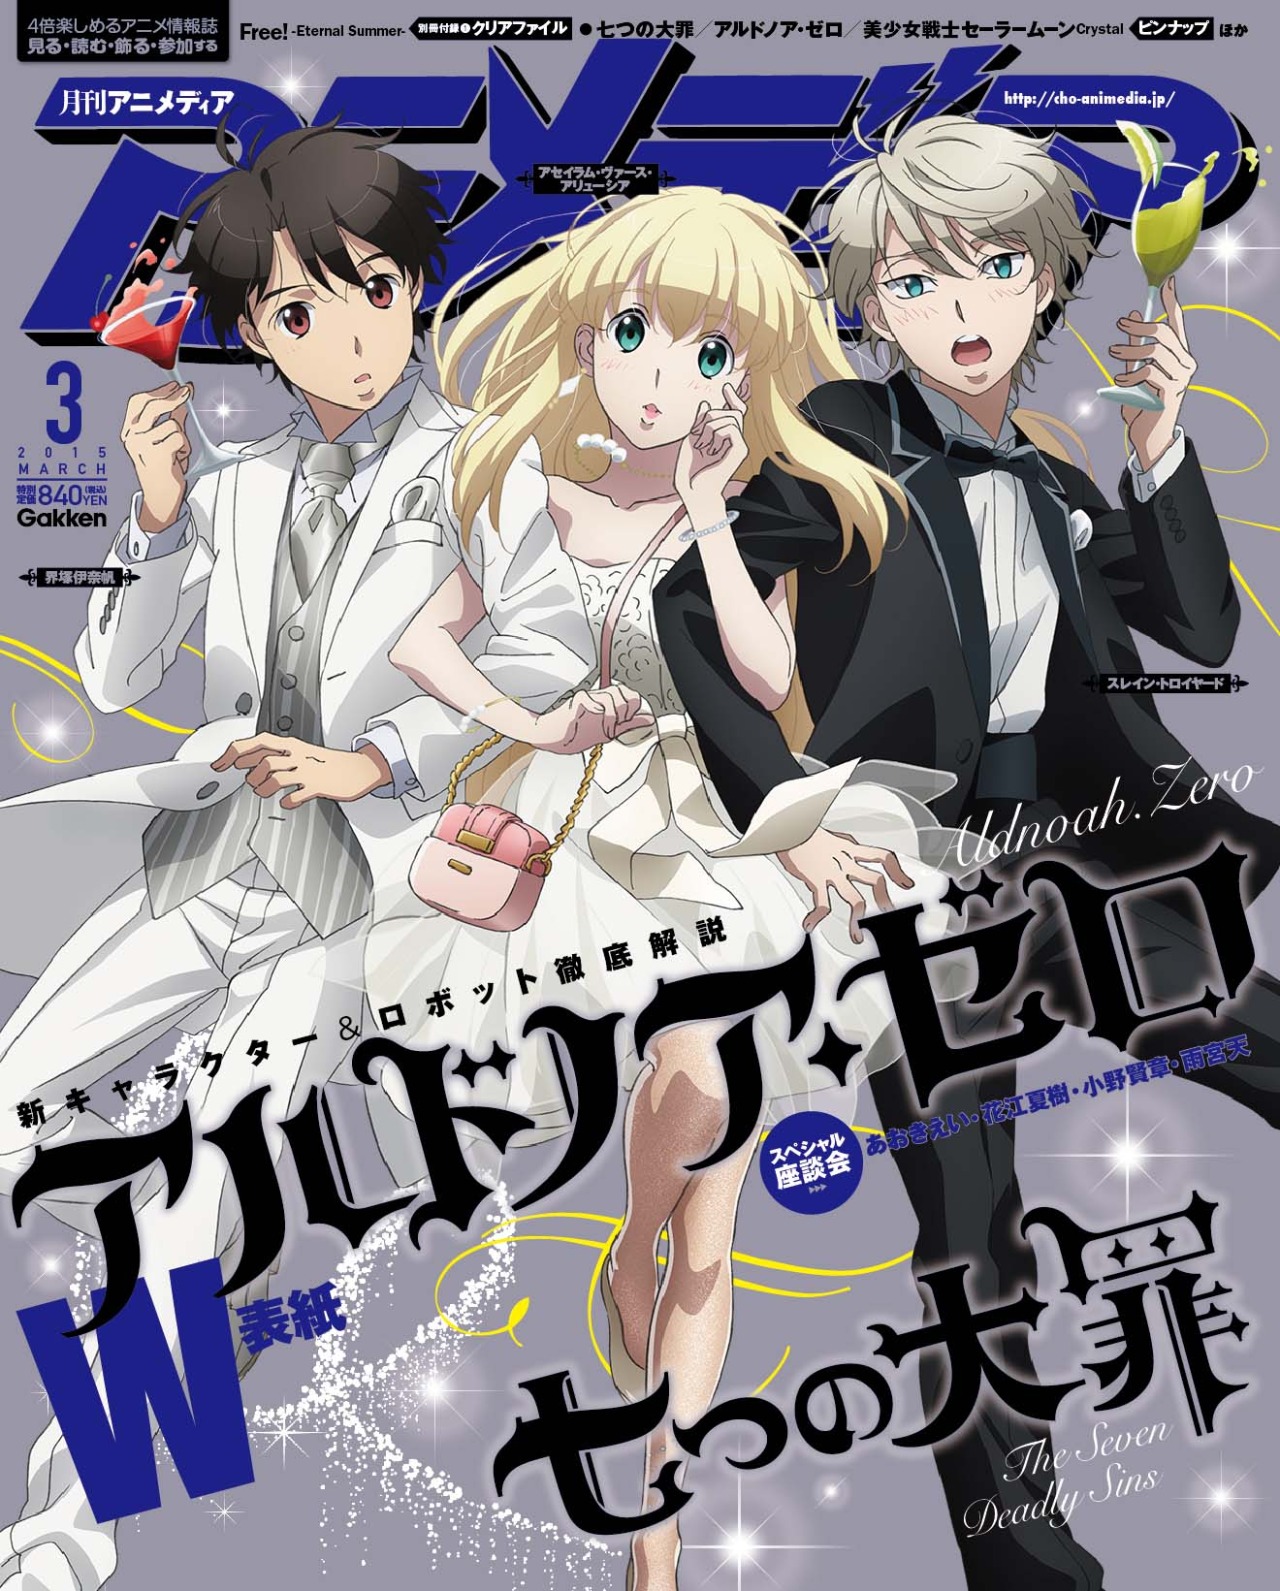 Animedia's-Latest-Issue-Becomes-Target-to-Japanese-Twitter-Followers_Haruhichan.com